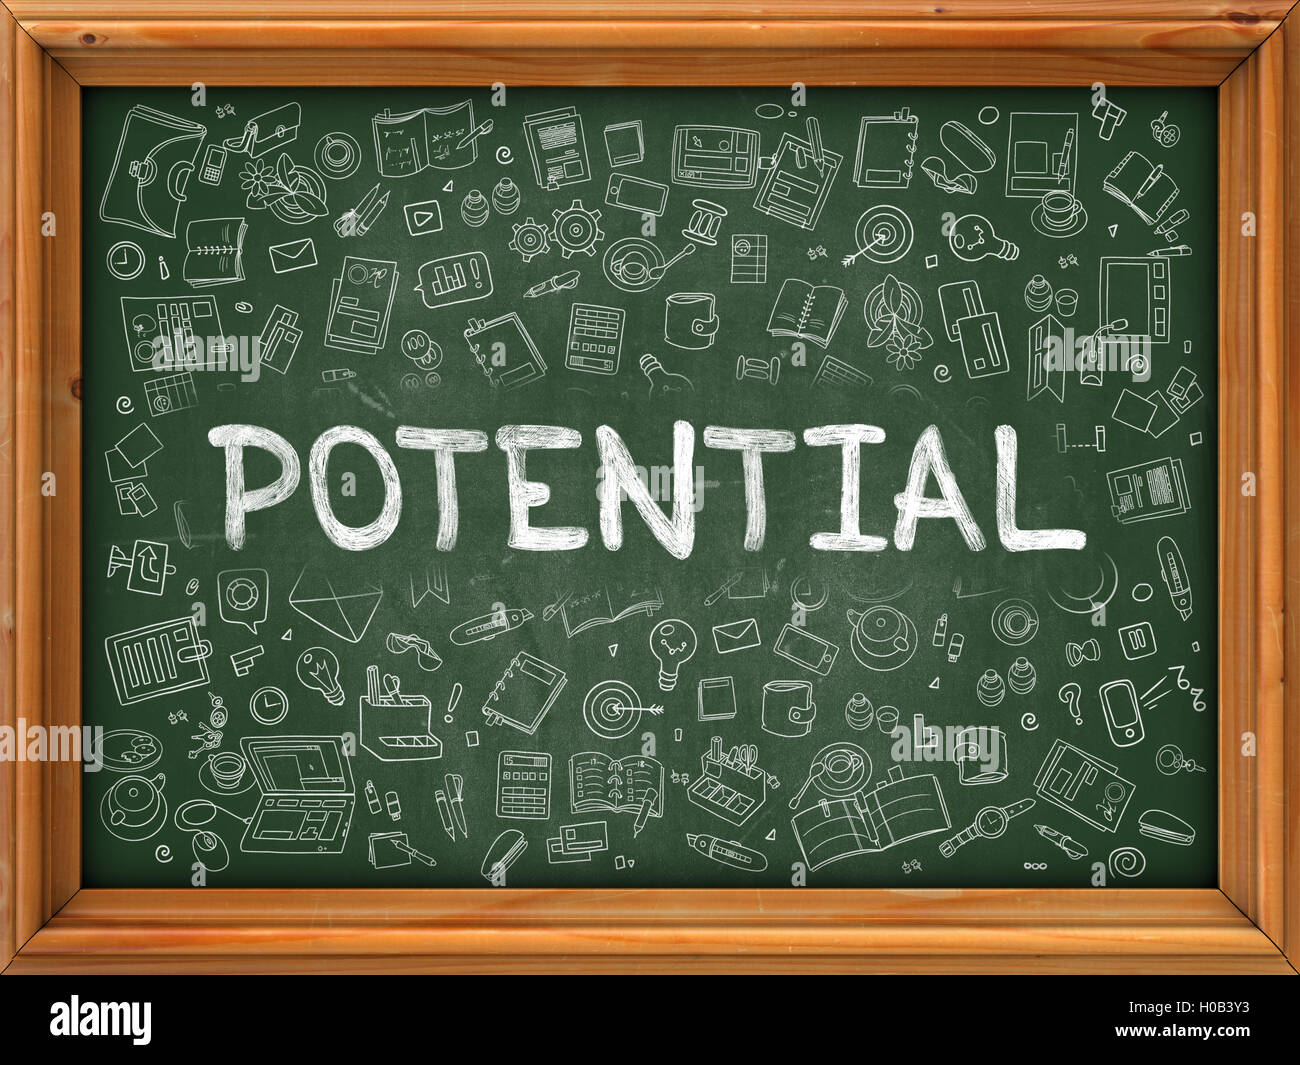 Potential - Hand Drawn on Green Chalkboard. Stock Photo